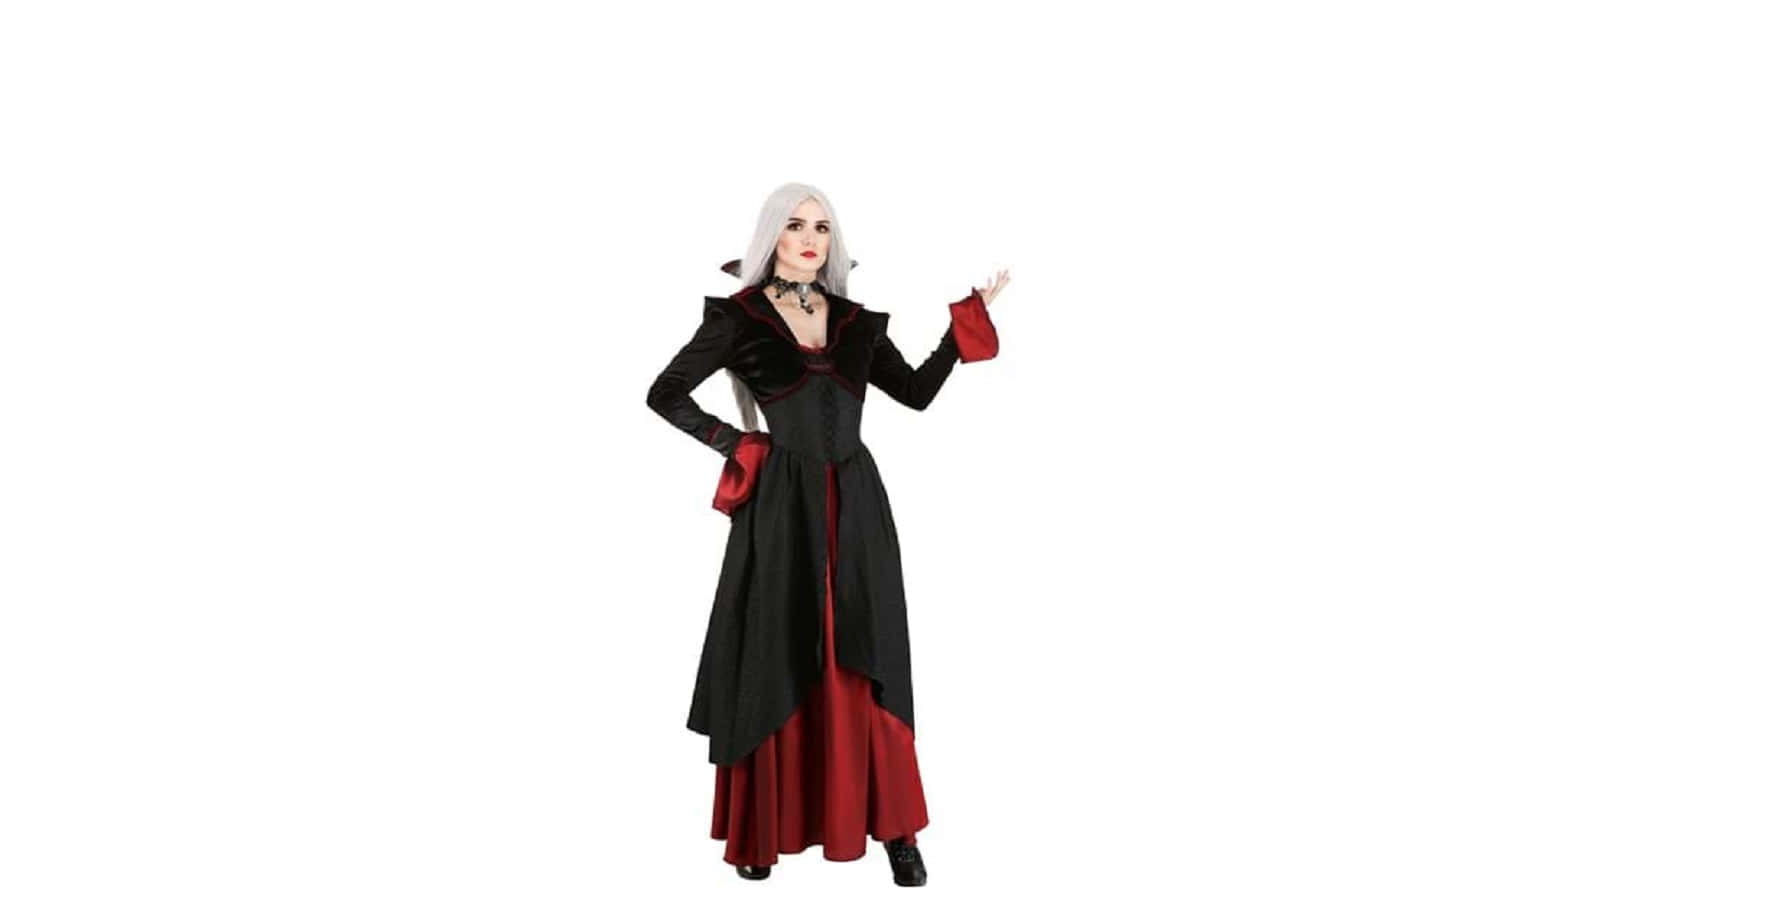 Eerie Vampire Costume with Red Accents Wallpaper